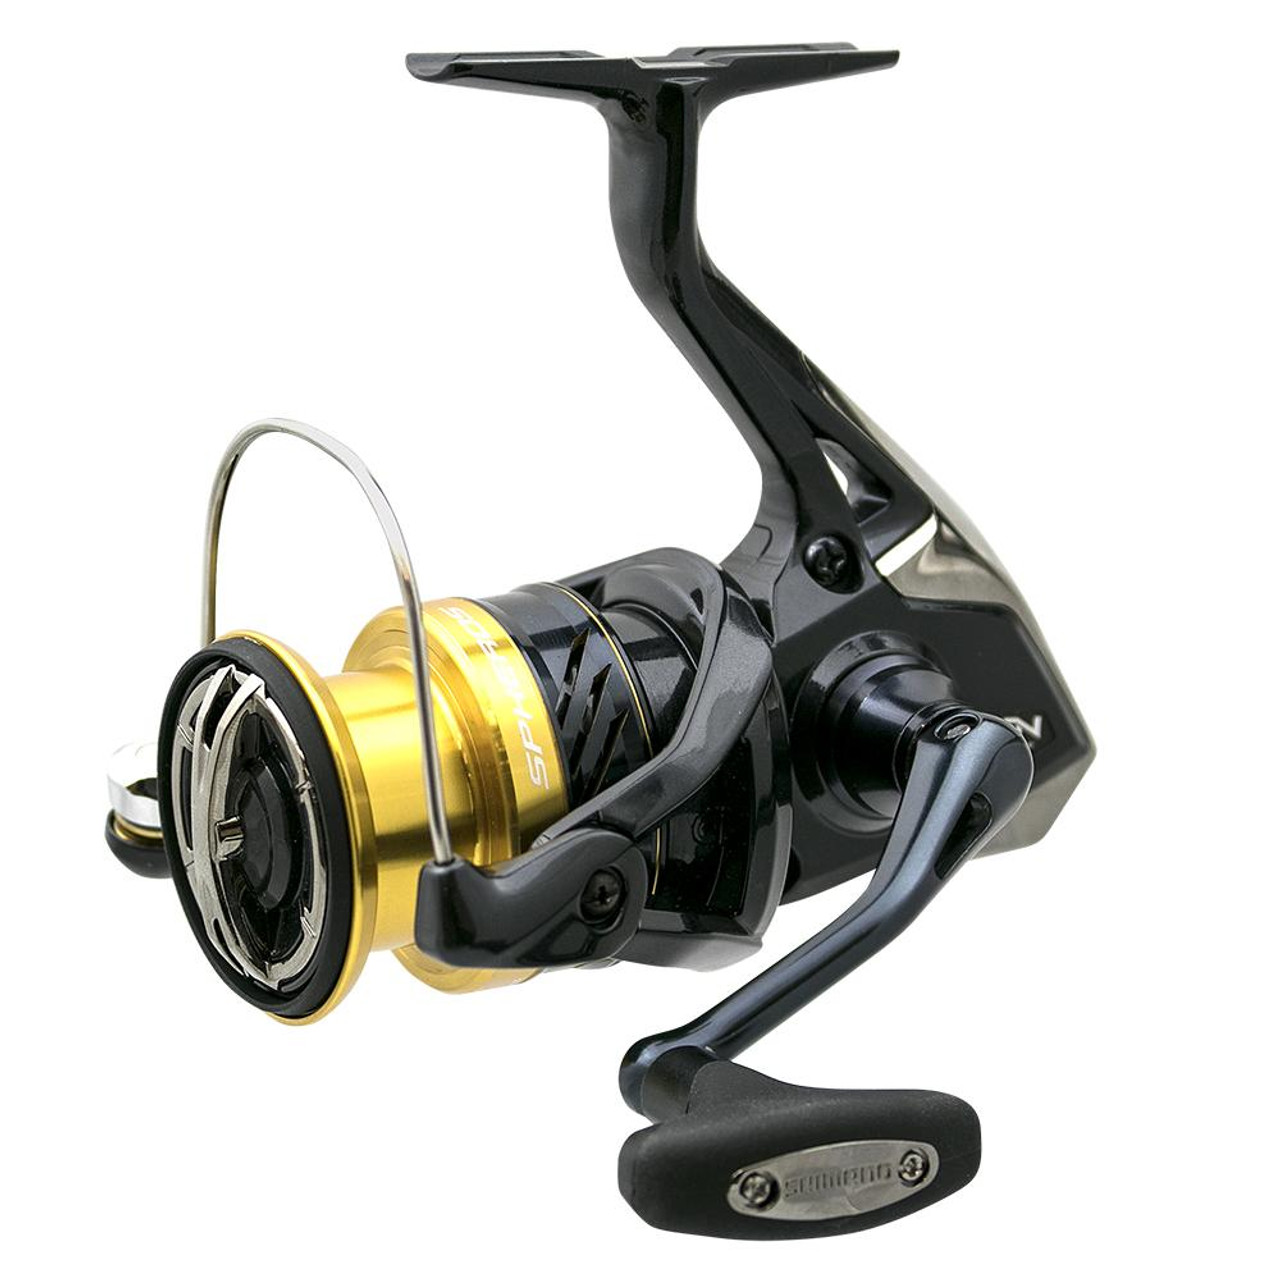 https://cdn11.bigcommerce.com/s-i6ykqoitnd/images/stencil/1280x1280/products/8955/52319/shimano-spheros-sw-3000-4000-spinning-saltwater-shimano-197318__37113.1639601039.jpg?c=1&imbypass=on